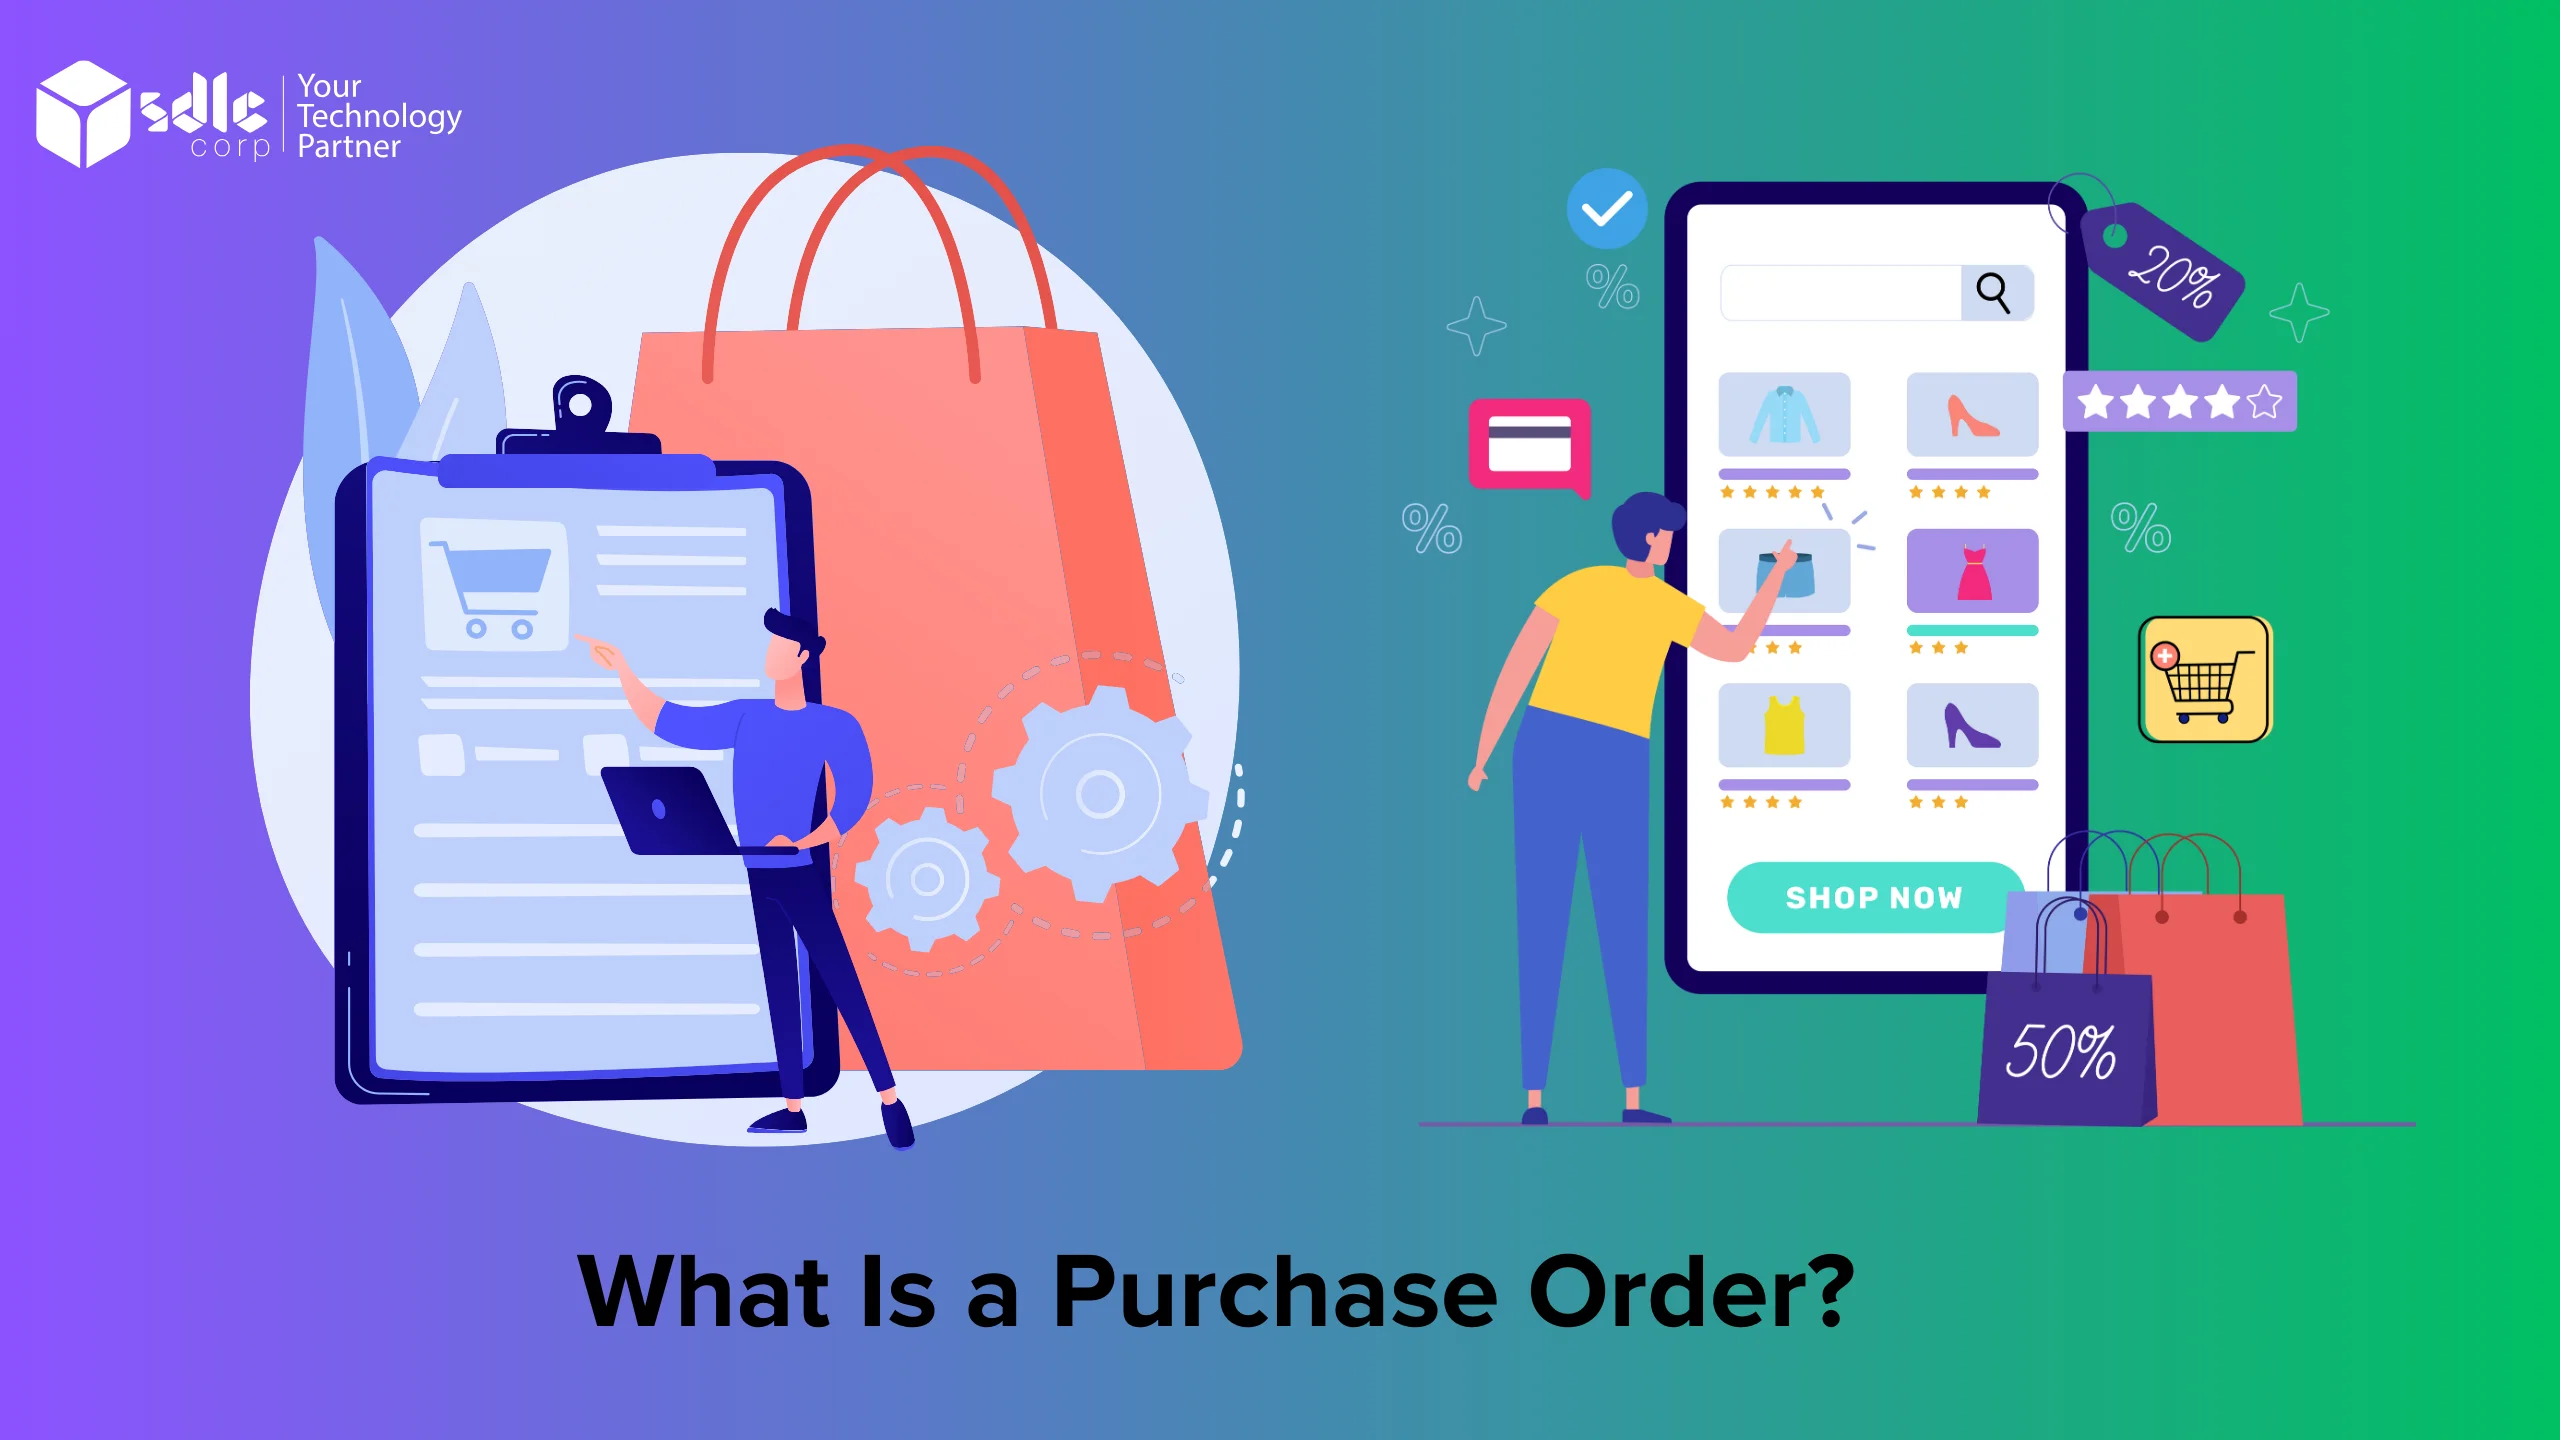 What Is a Purchase Order